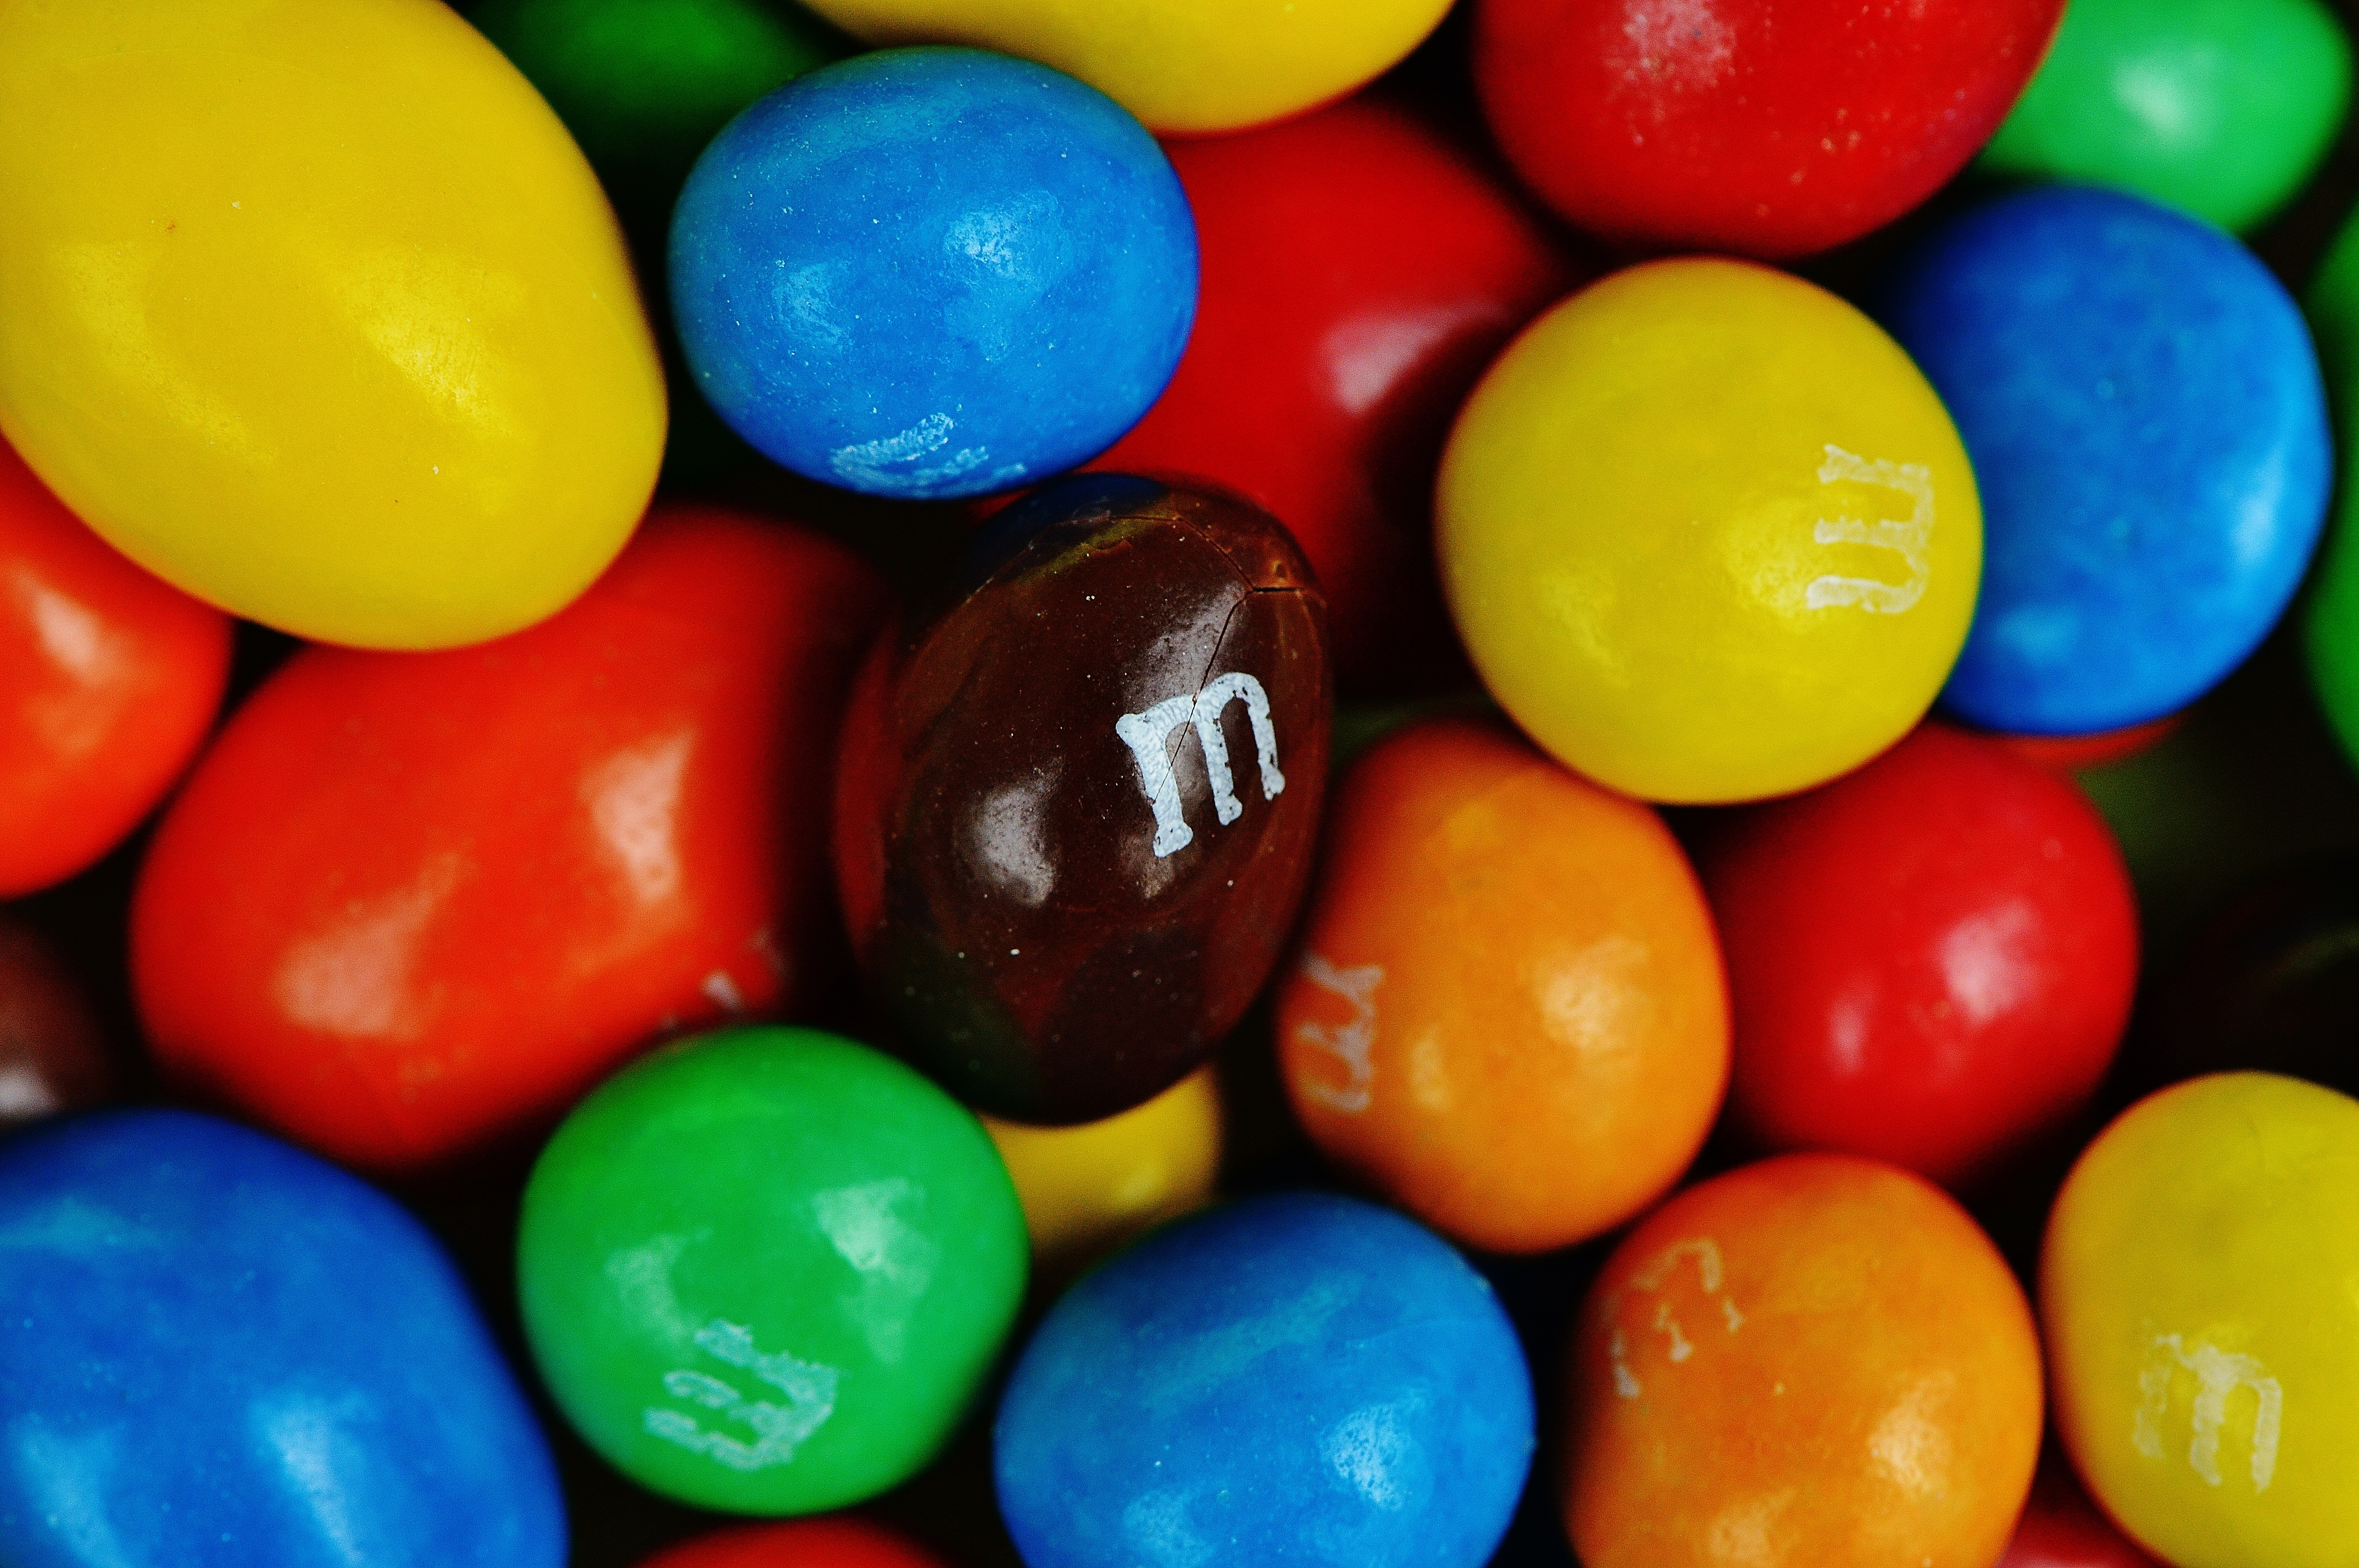 assorted M&Ms candies